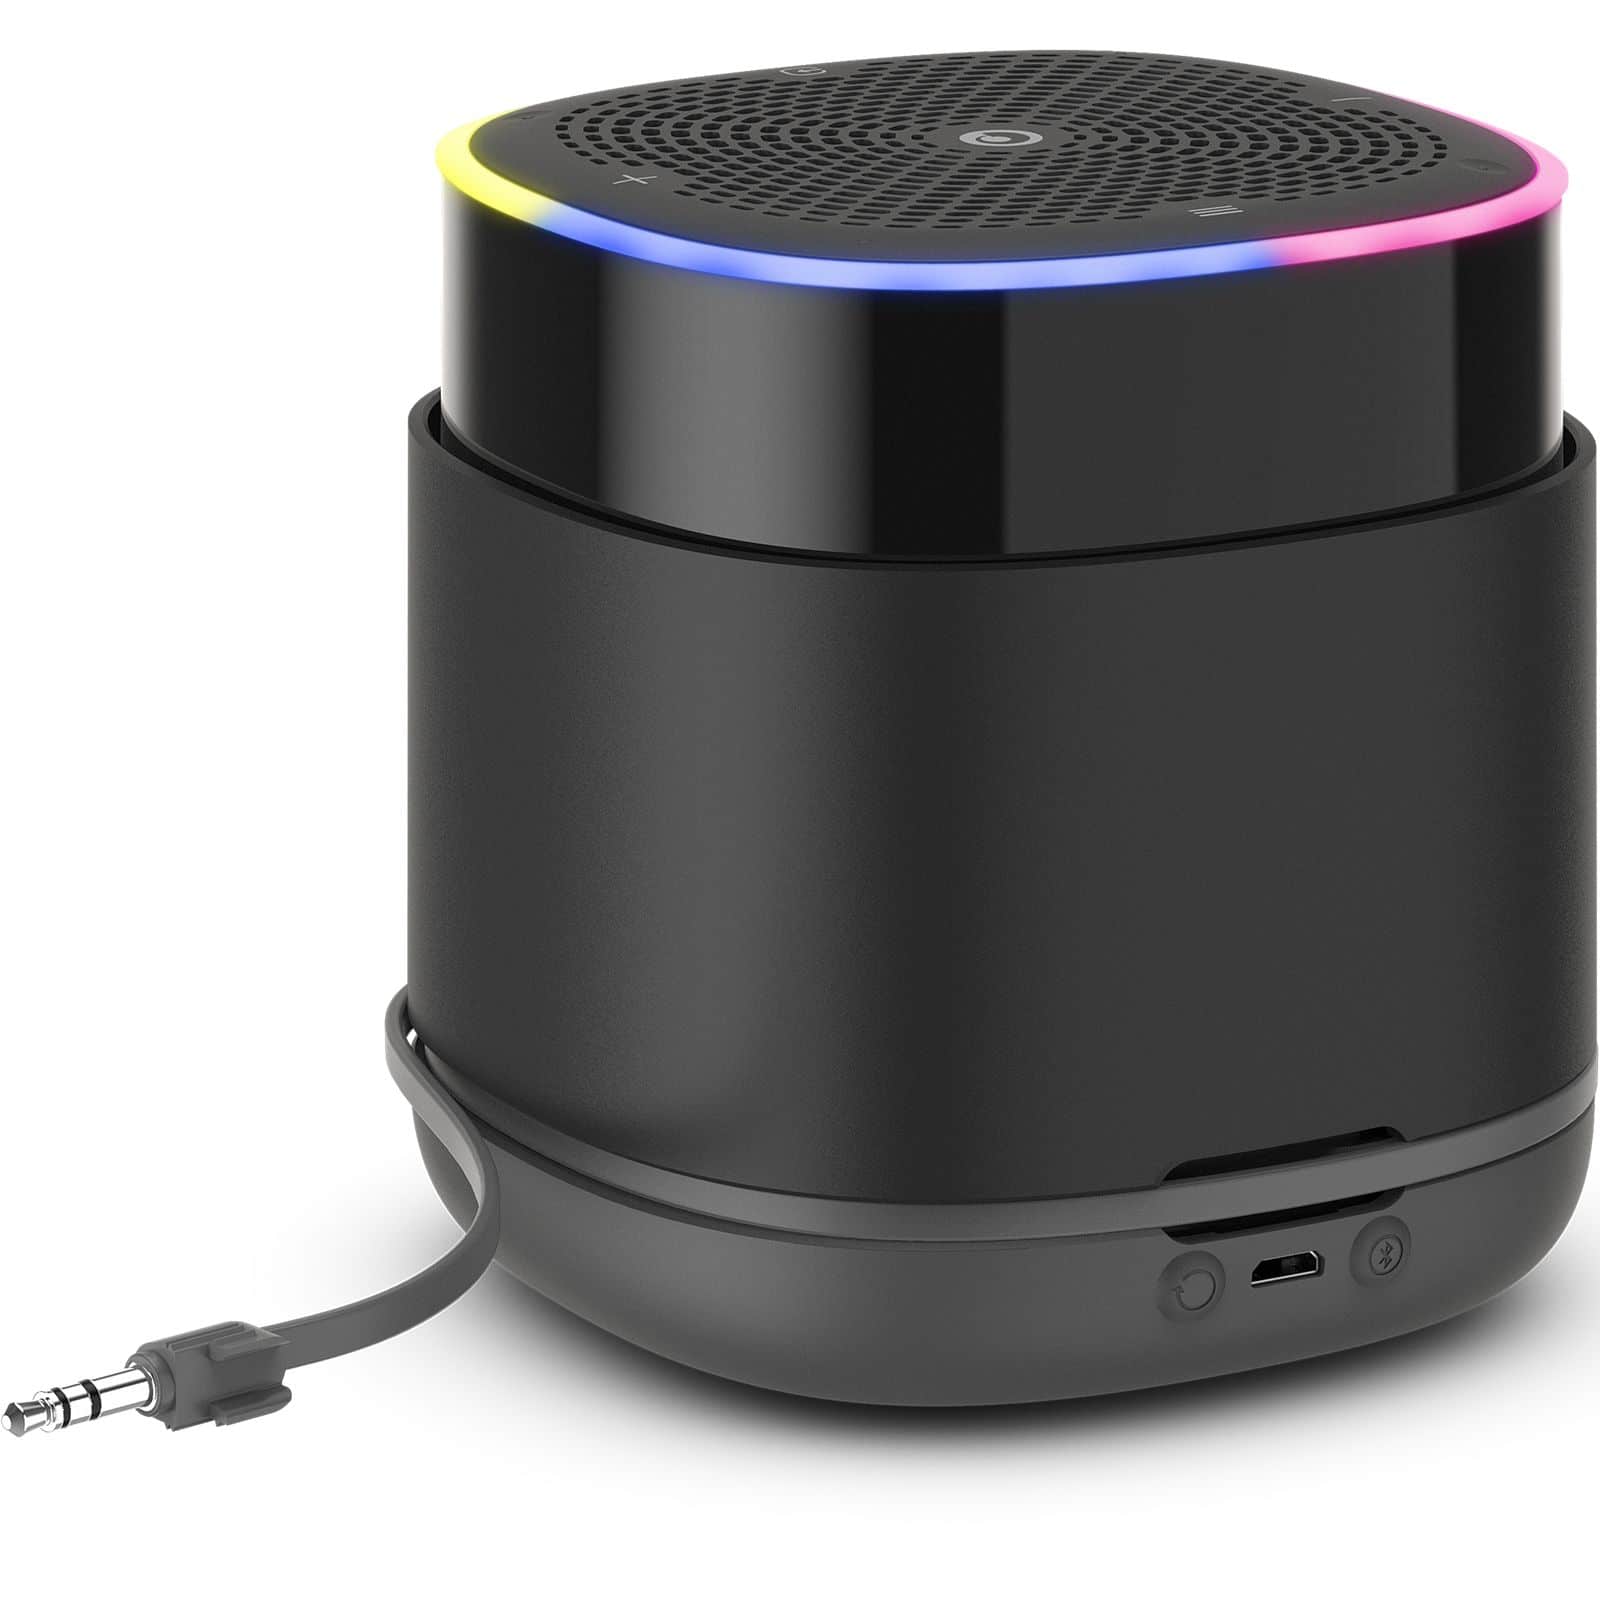 StreamR Bluetooth Speaker from Pure